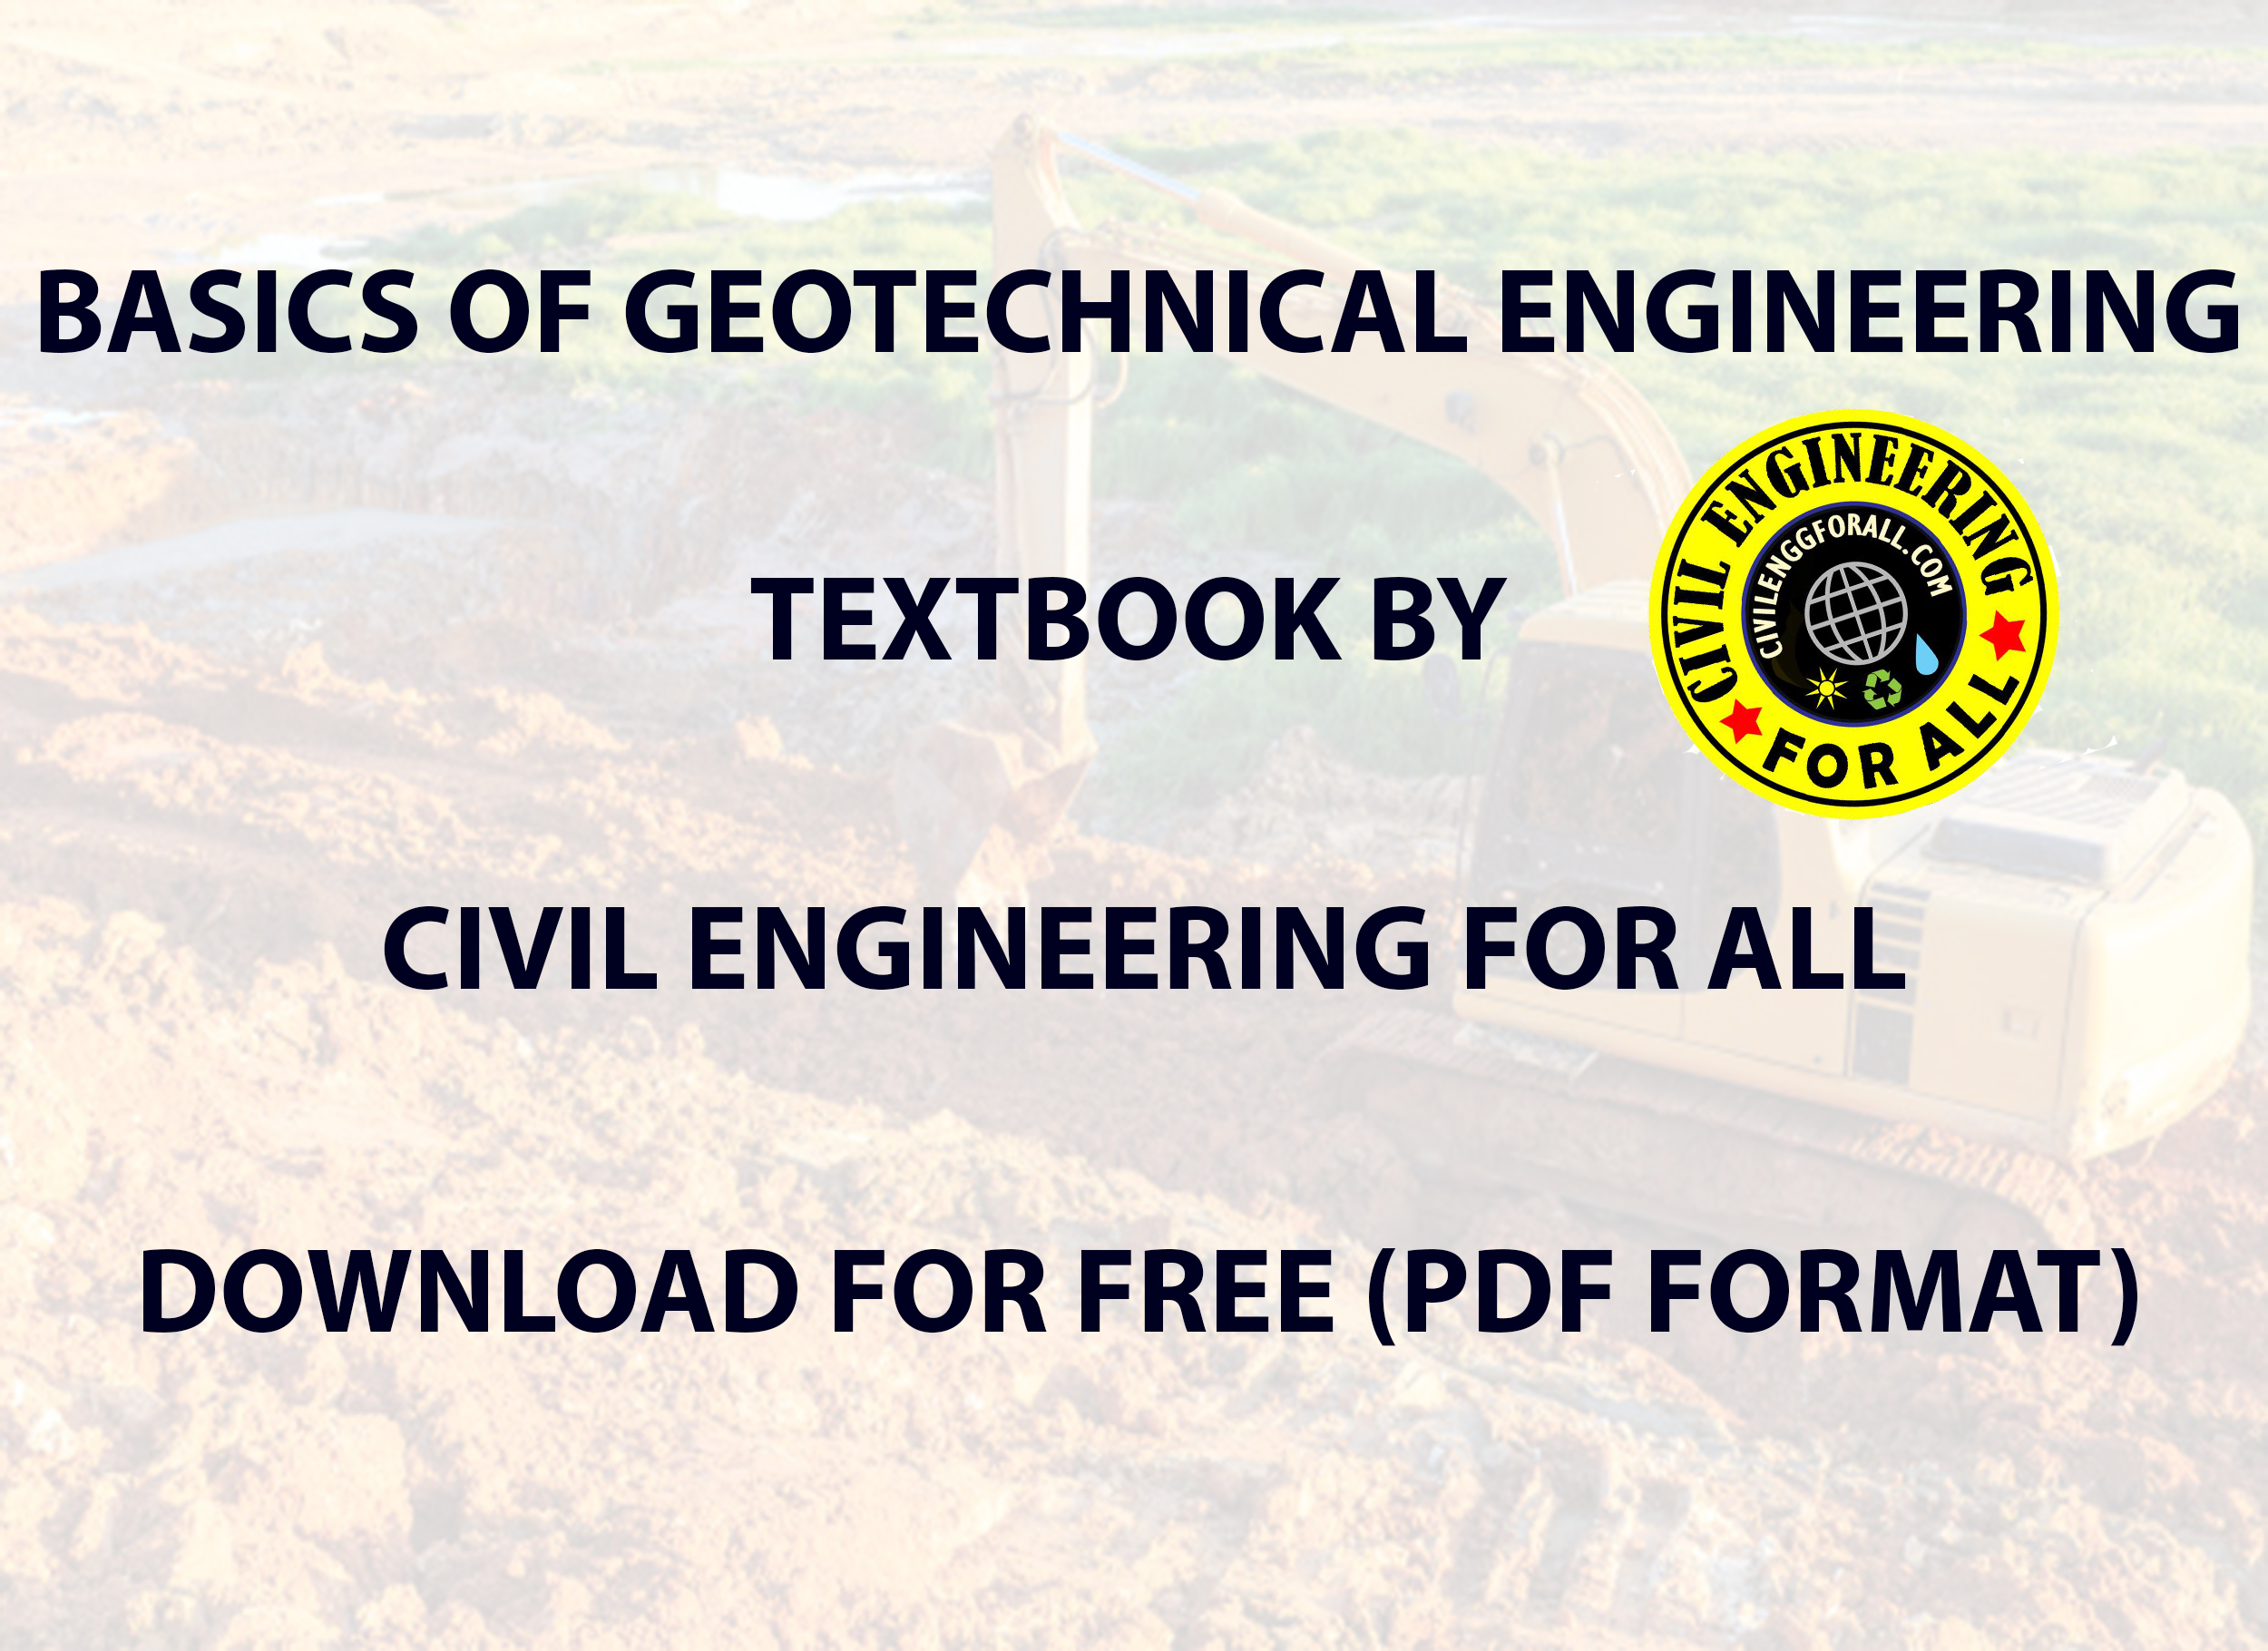 Basics of Geotechnical Engineering Textbook by CivilEnggForAll Free Download PDF